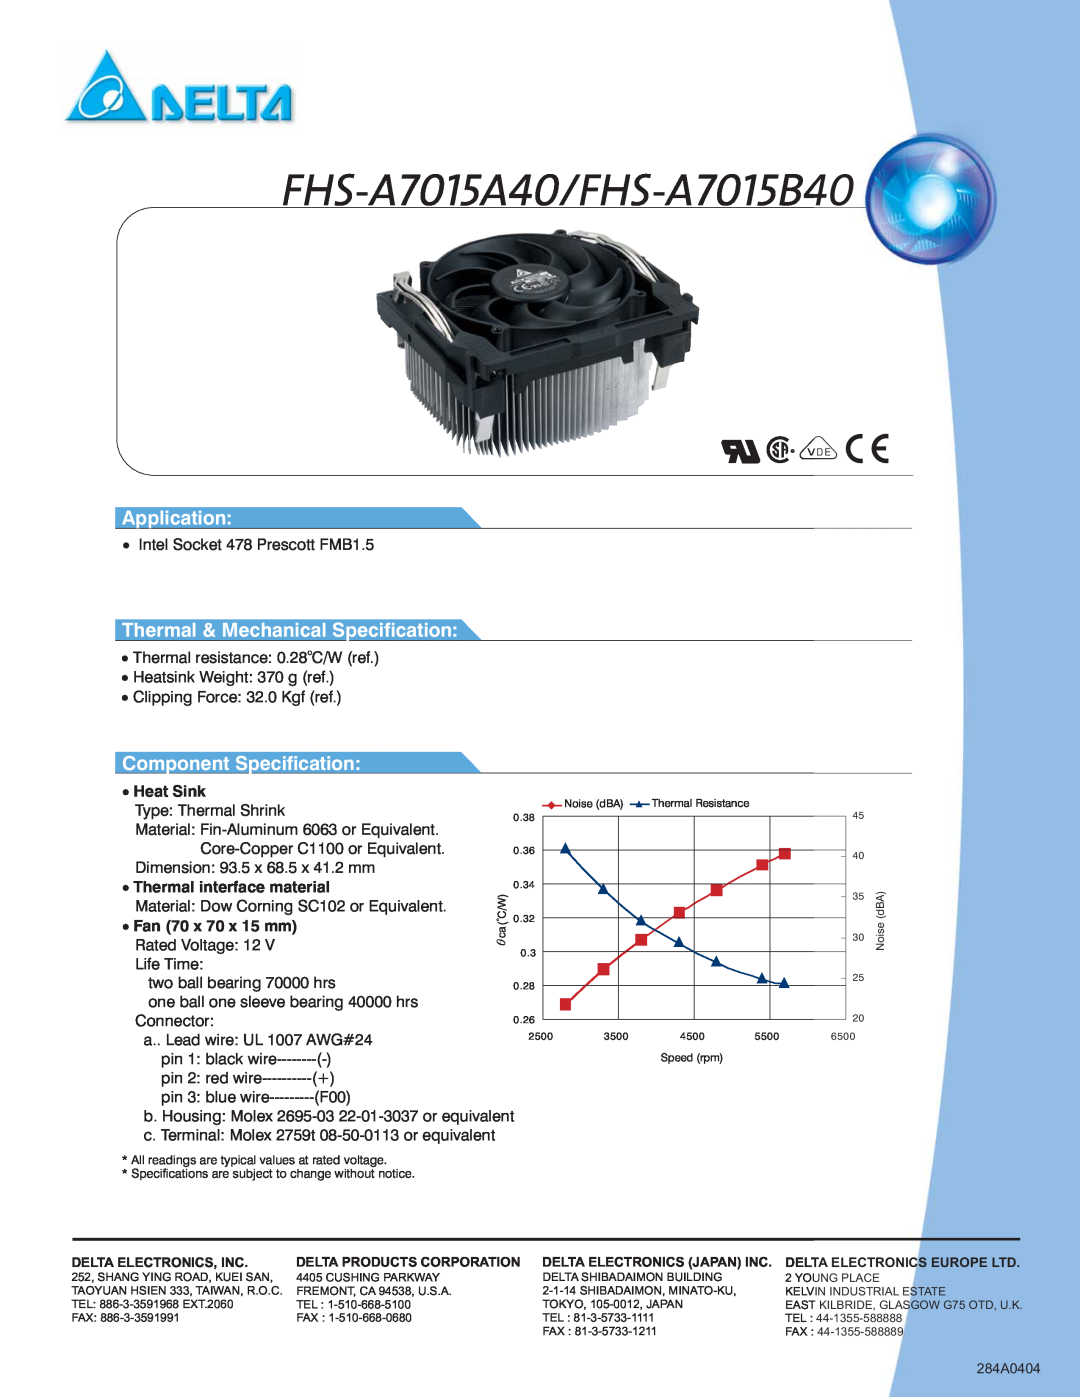 Delta Electronics specifications FHS-A7015A40/FHS-A7015B40, Application, Thermal & Mechanical Specification, Heat Sink 